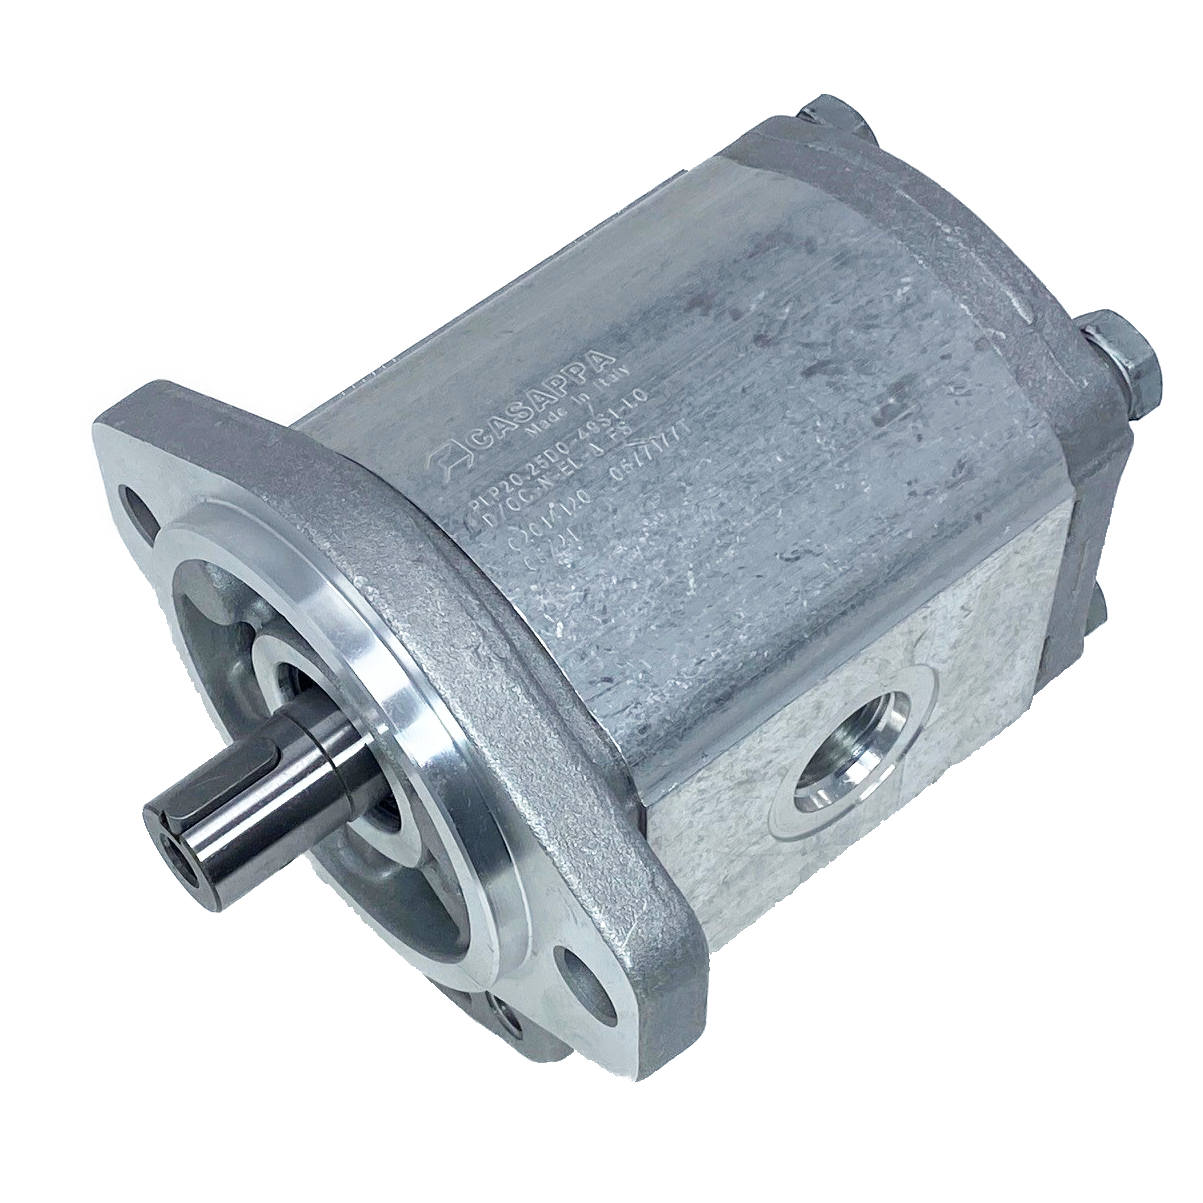 PHM20.31,5B0-50S9-LOC/OG-N-EL : Casappa Polaris Gear Motor, 33.03cc, 2900psi Rated, 2500RPM, Reversible Interior Drain, 3/4" Bore x 3/16" Key Shaft, SAE A 2-Bolt Flange, 0.625 (5/8") #10 SAE Inlet, 1.25" #20 SAE Outlet, Cast Iron Body, Aluminum Flange